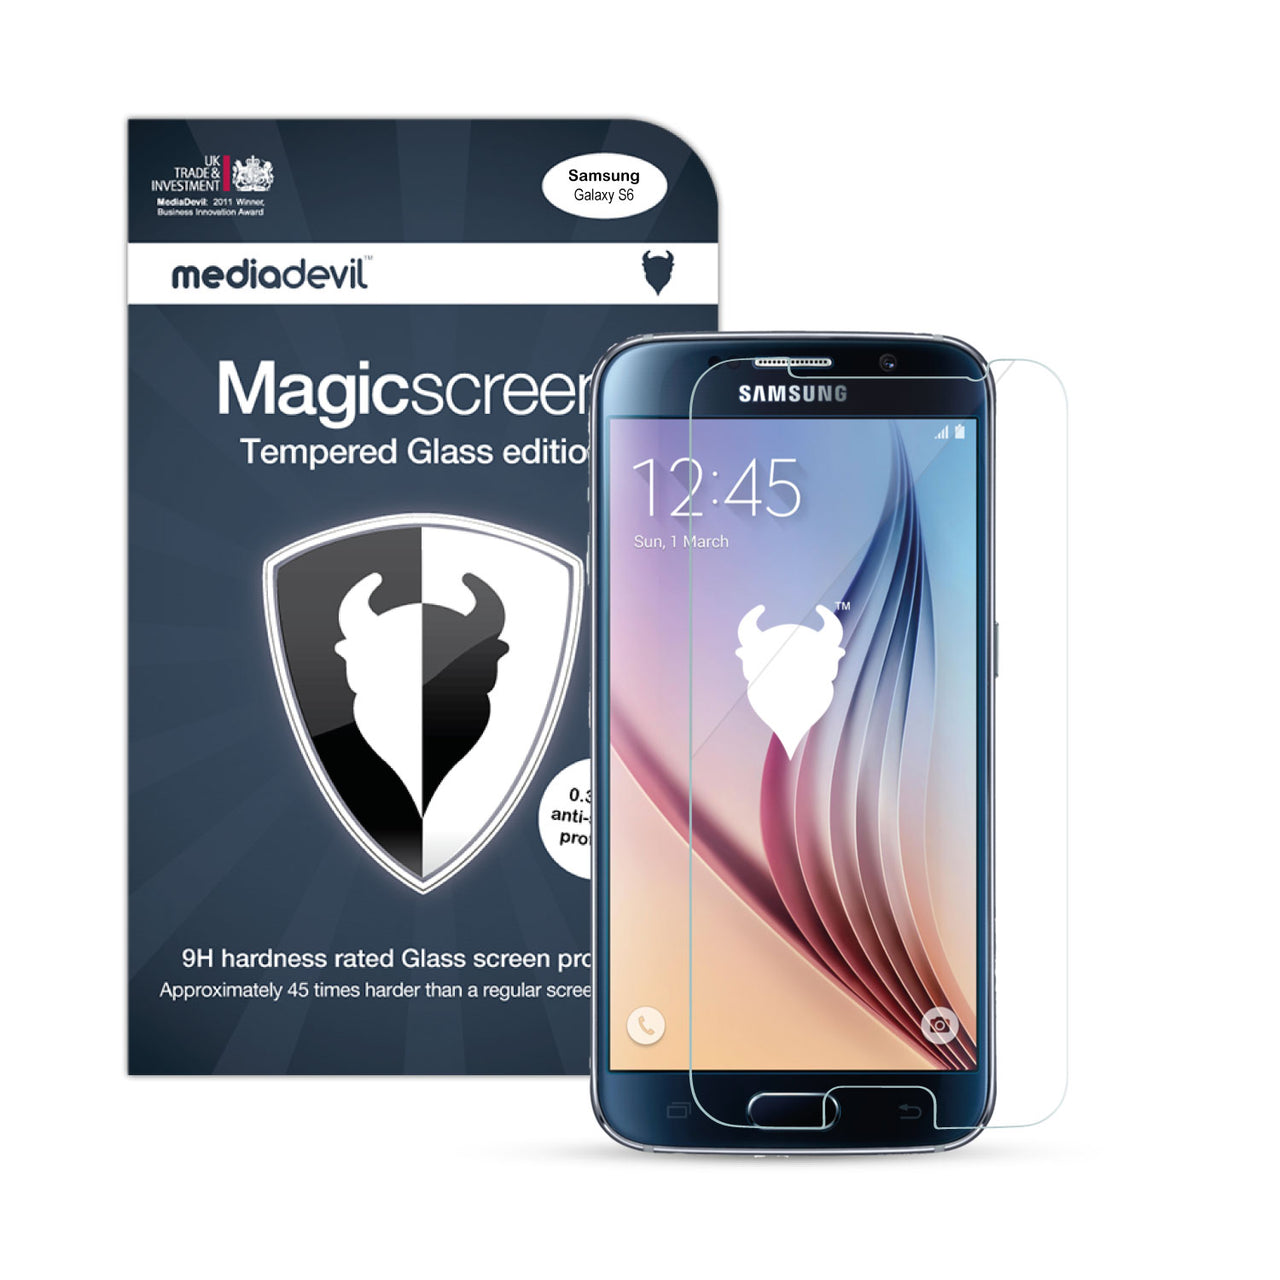 Samsung Galaxy S6 Tempered Glass Screen Protector (Clear)